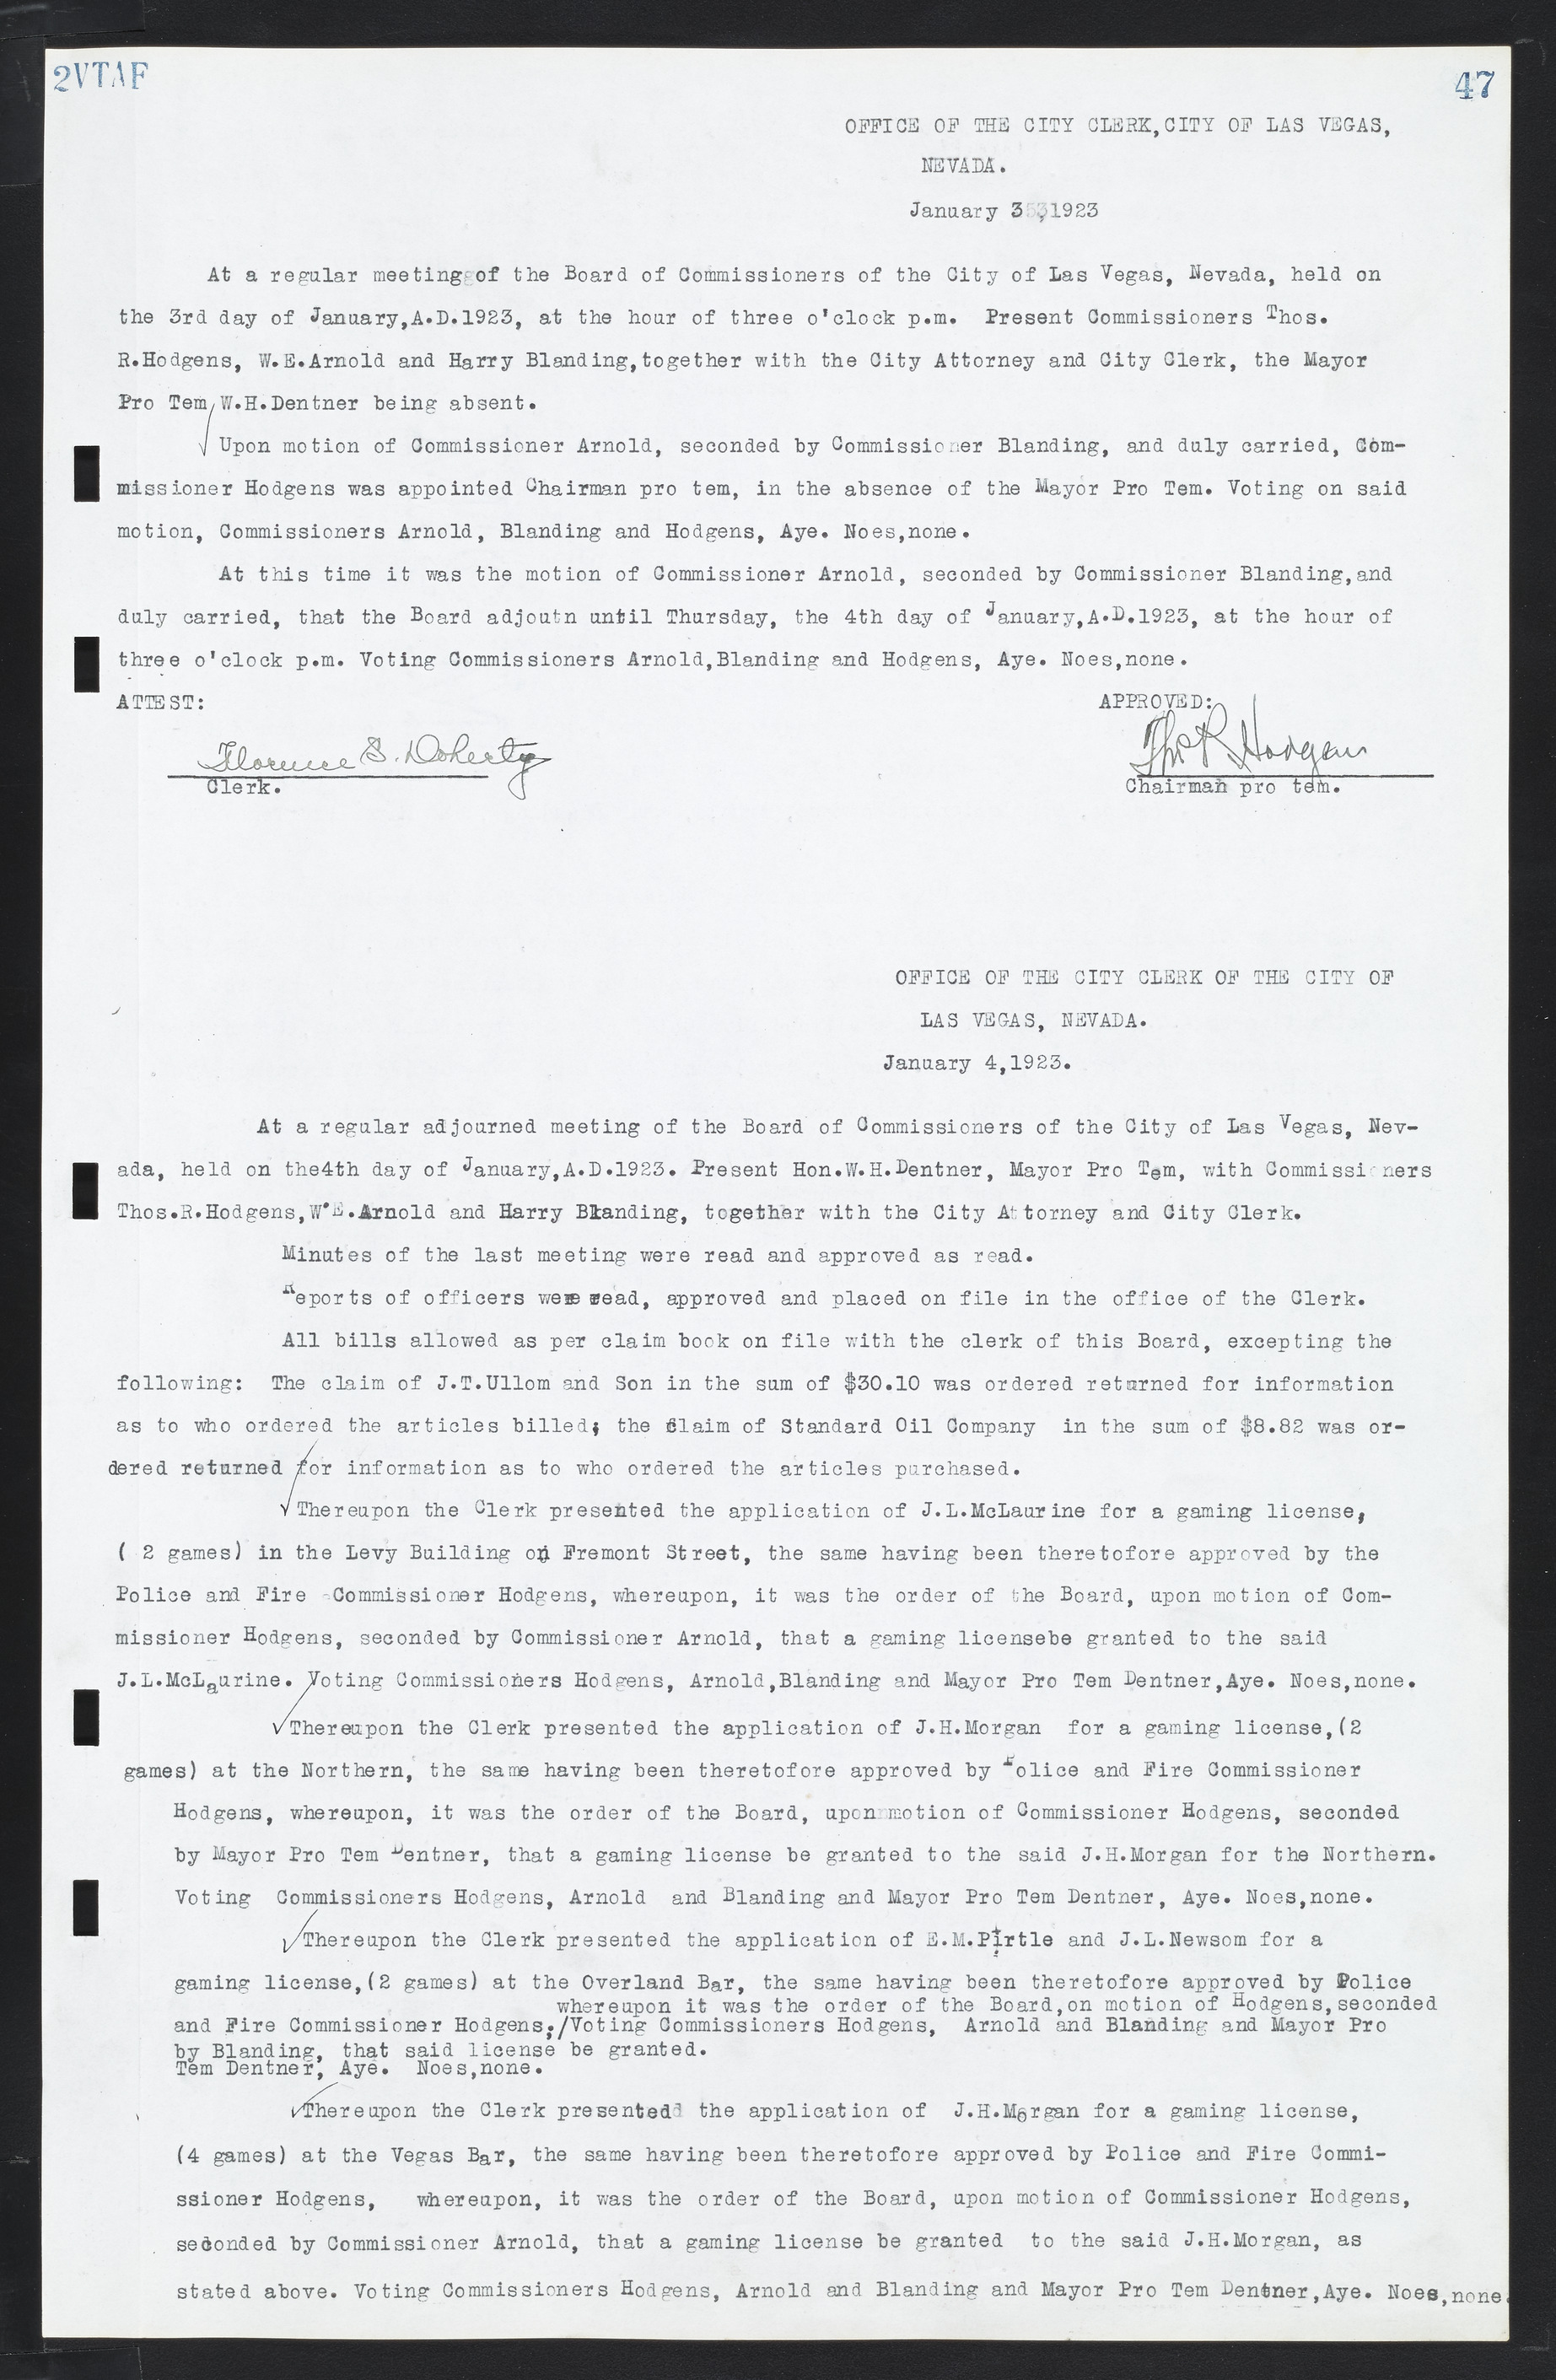 Las Vegas City Commission Minutes, March 1, 1922 to May 10, 1929, lvc000002-54